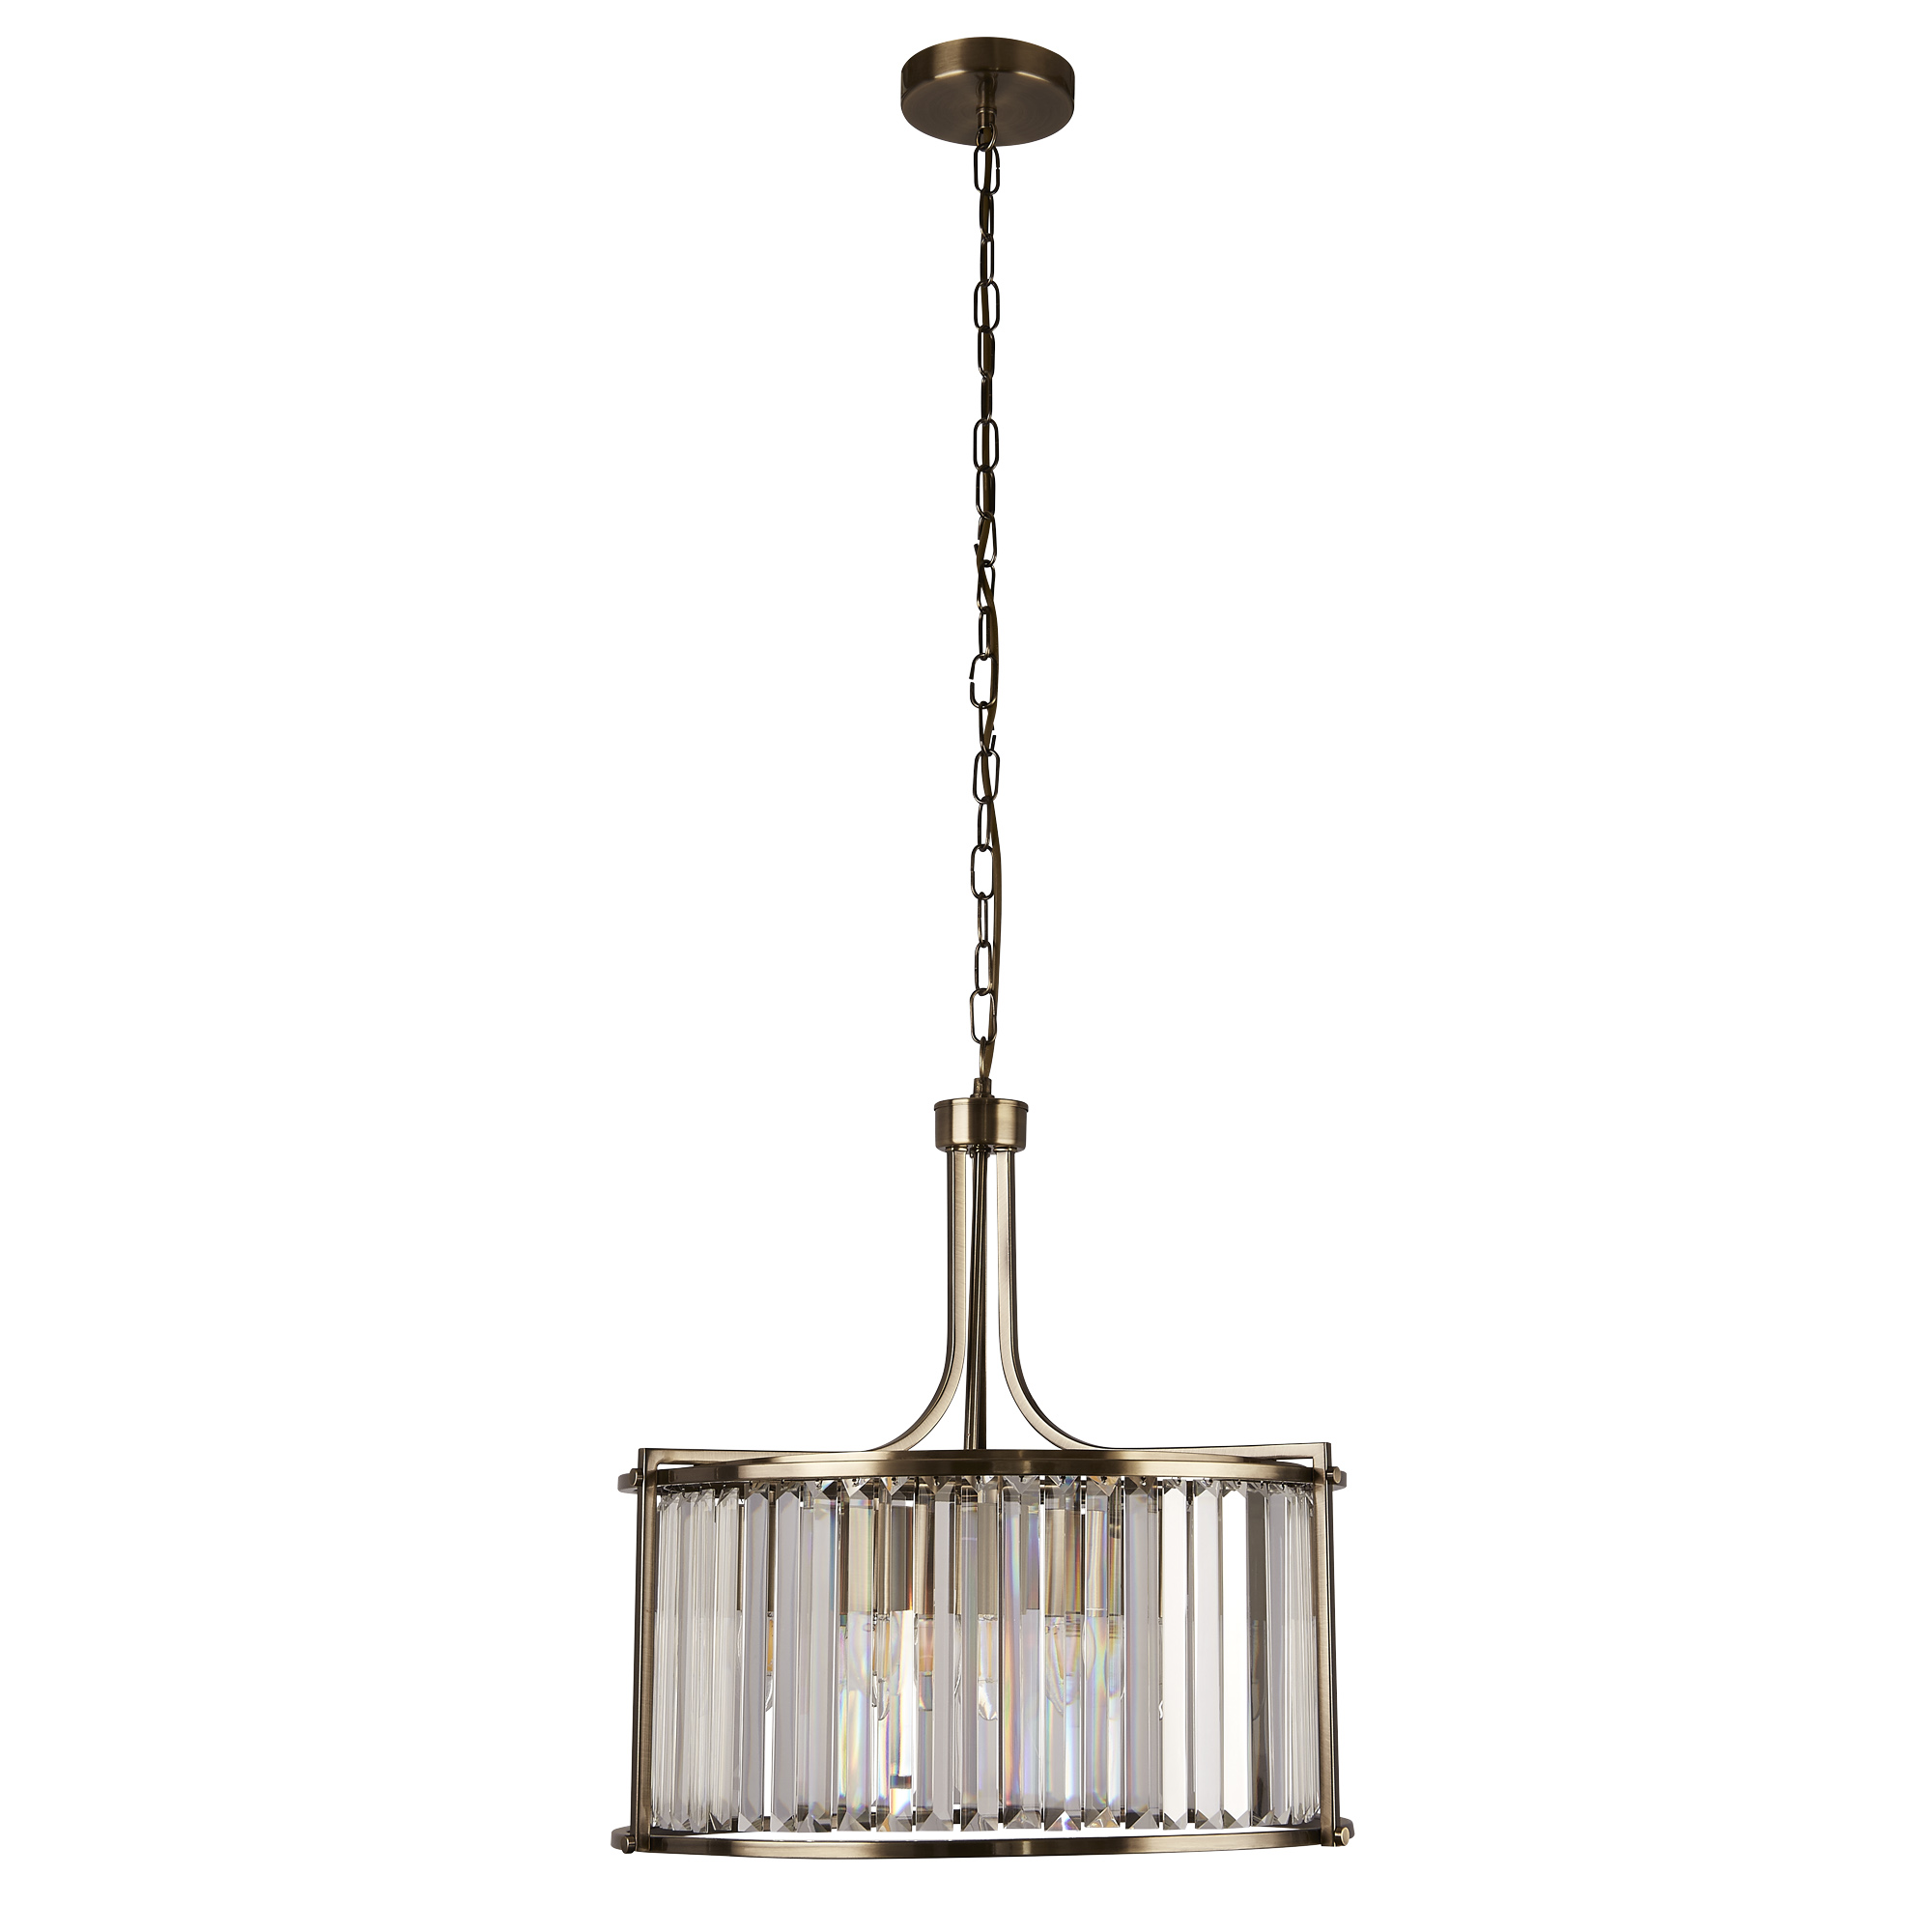 Victoria 5Lt Pendant - Antique Brass Metal & Clear Crystal